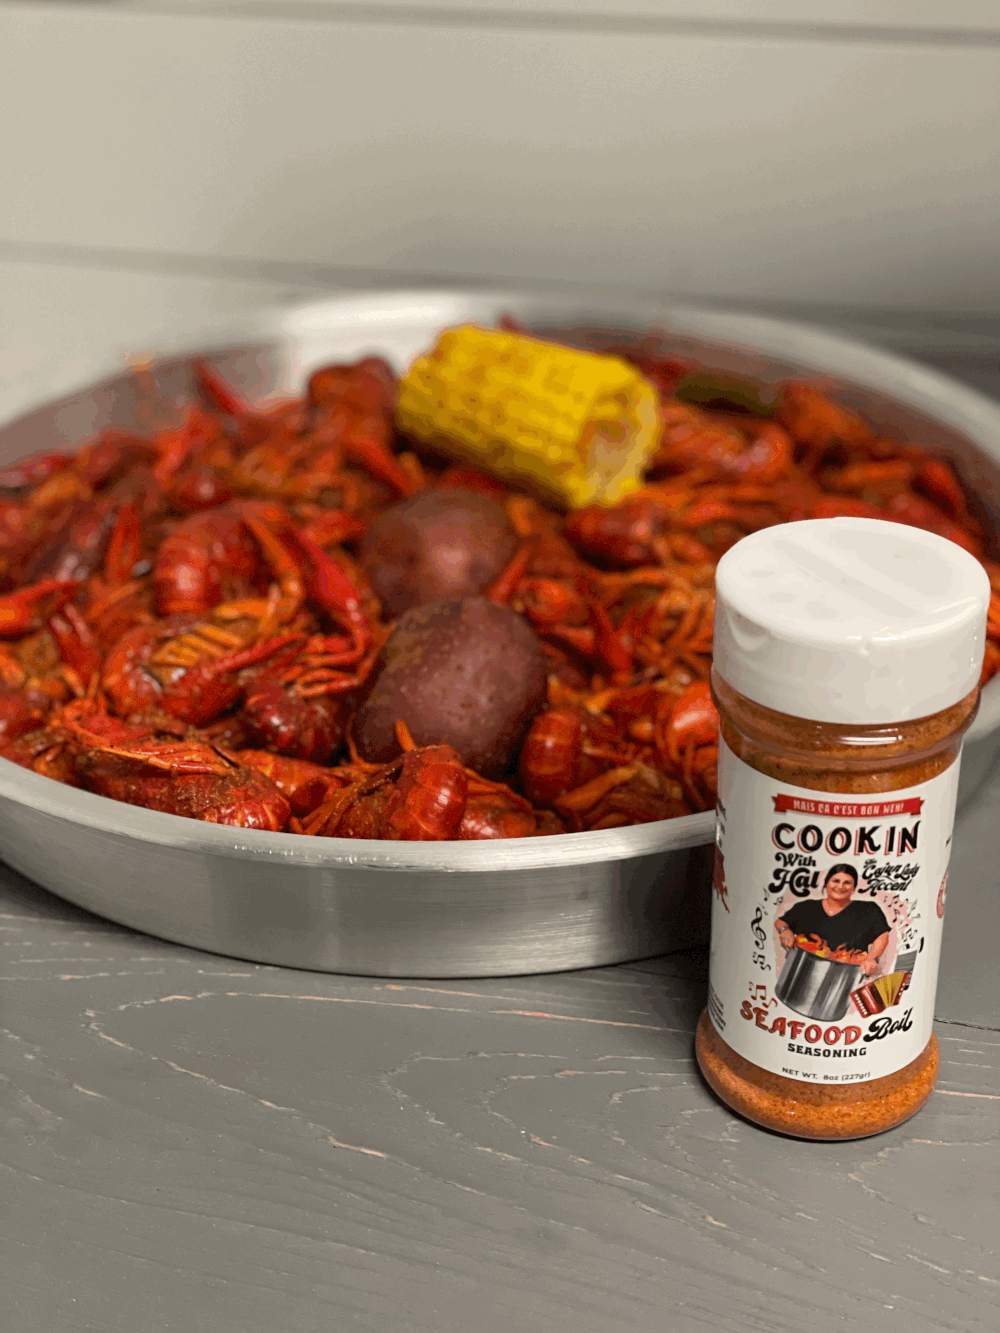 Seafood Boil  Fiesta Spices